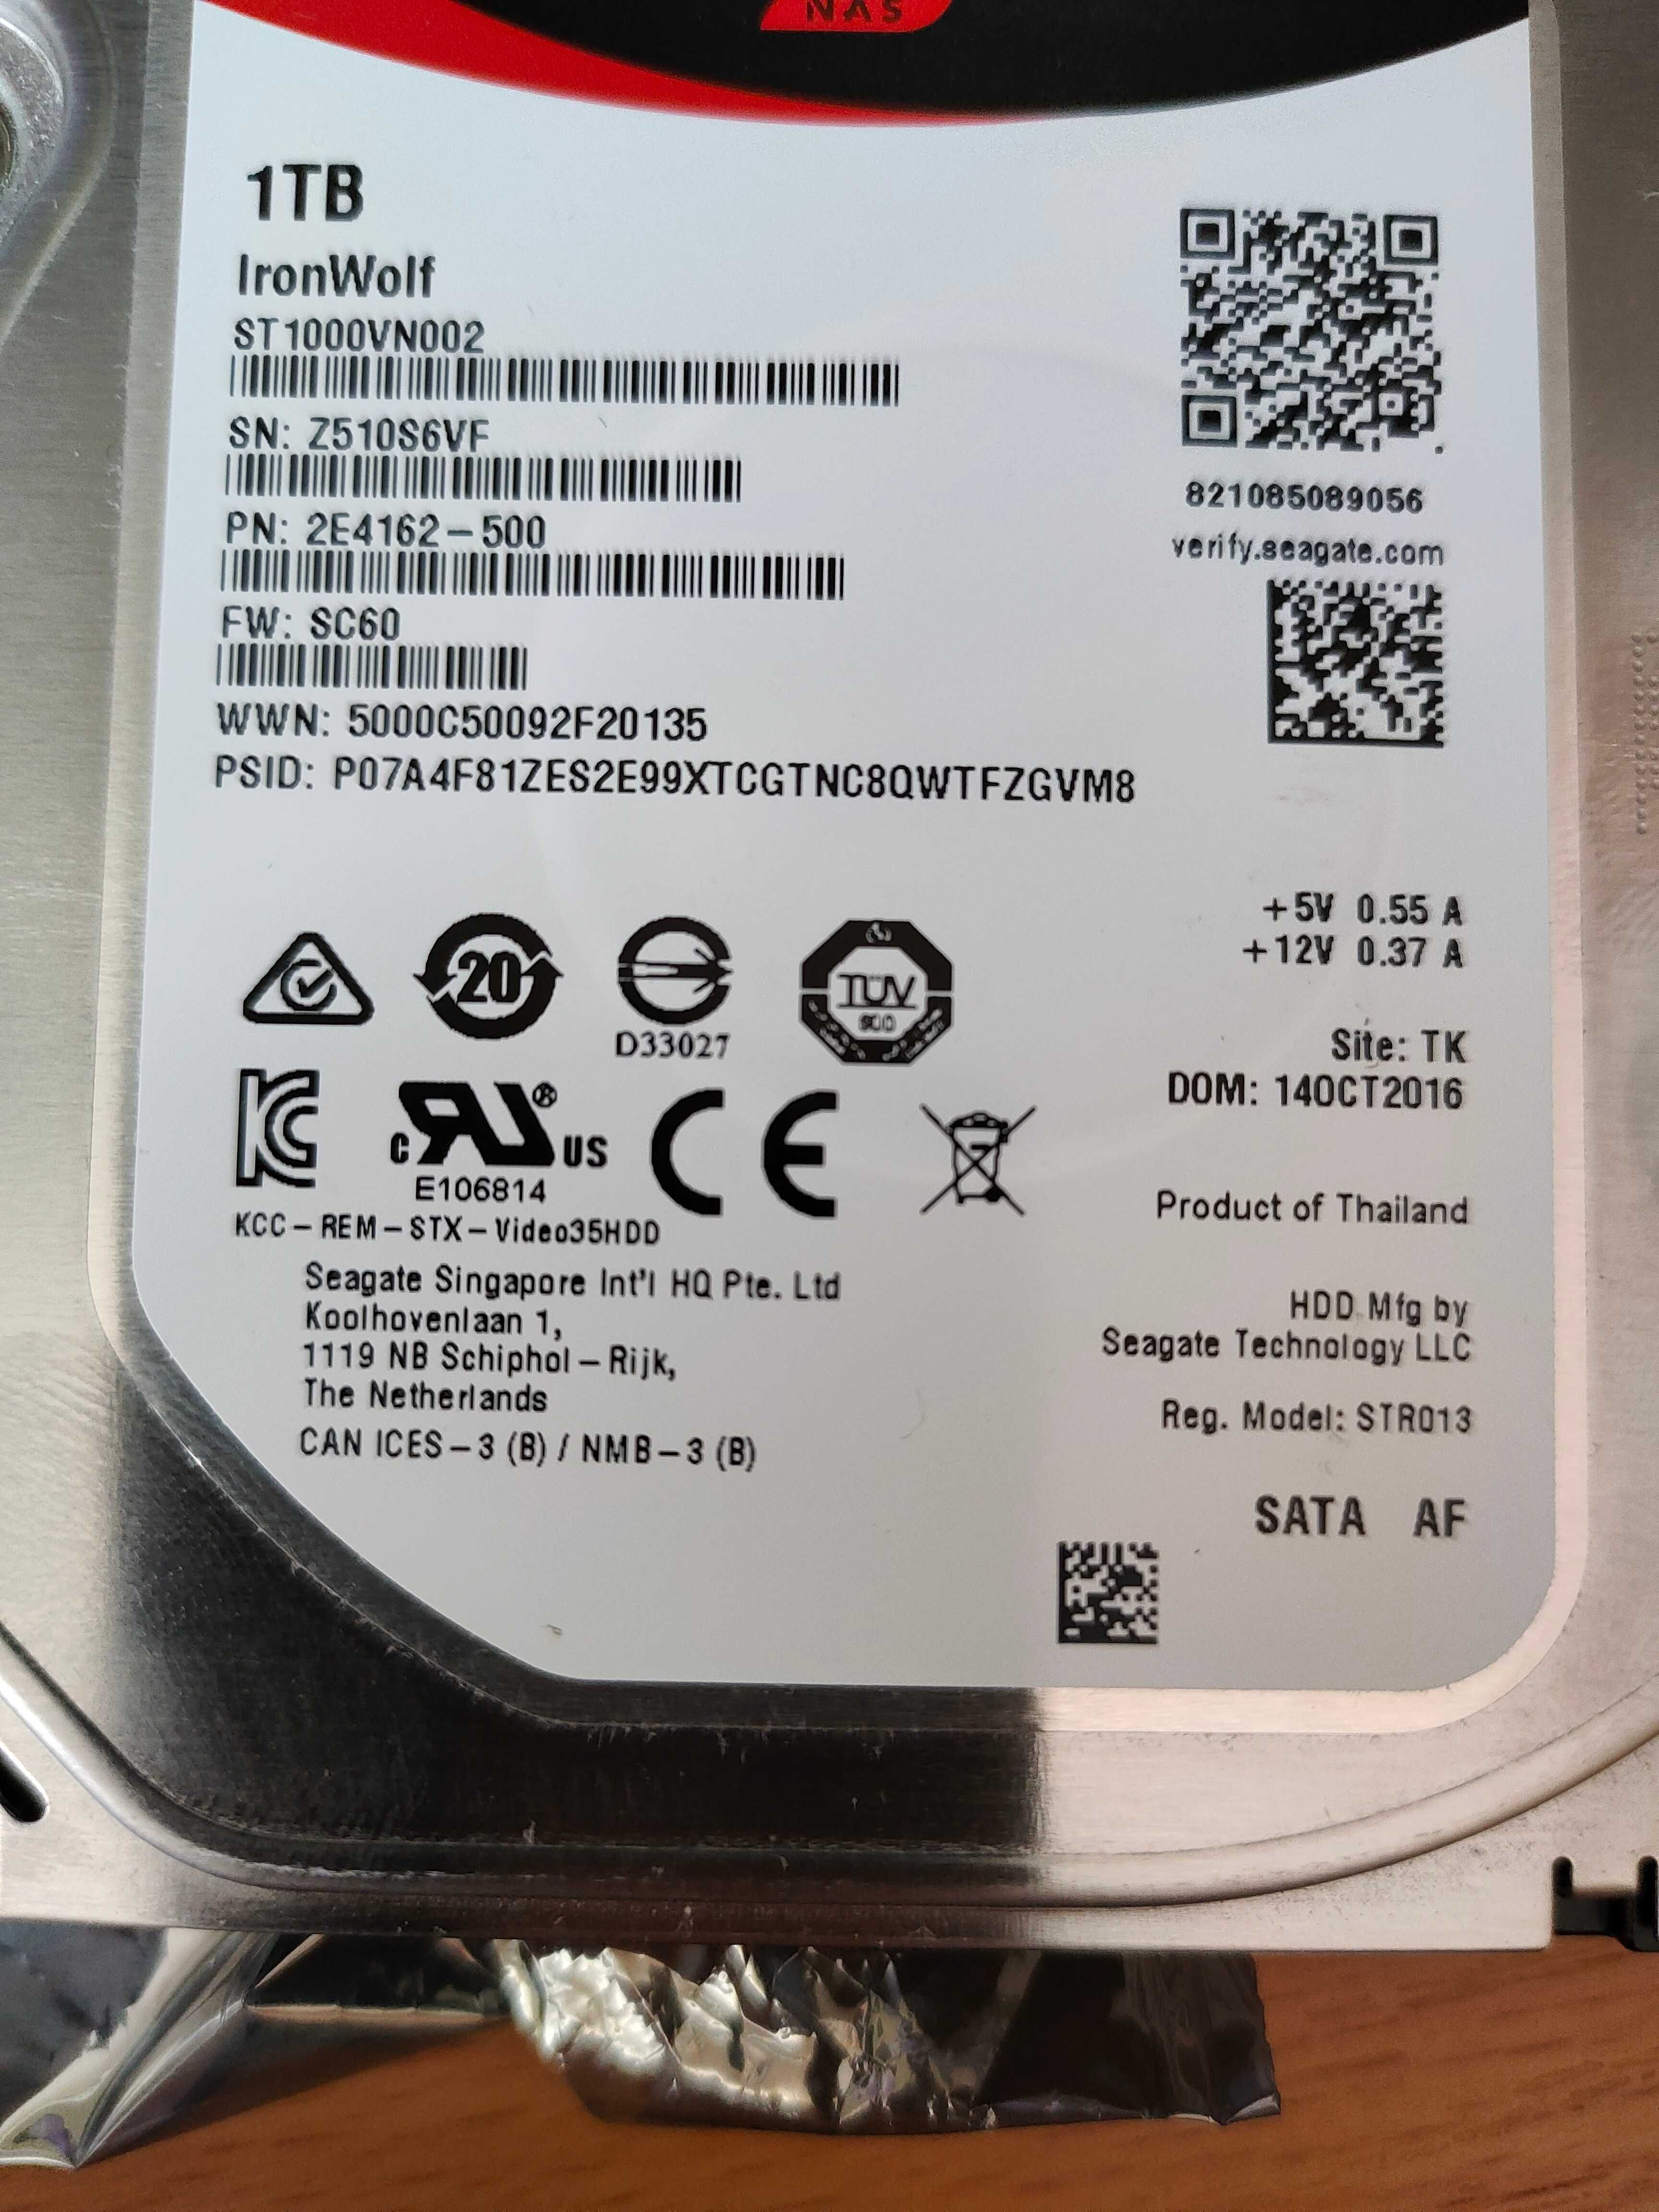 Dysk HDD 1TB Ironwolf Seagate RED LABEL, storage, NAS, SAN, drive, 3.5